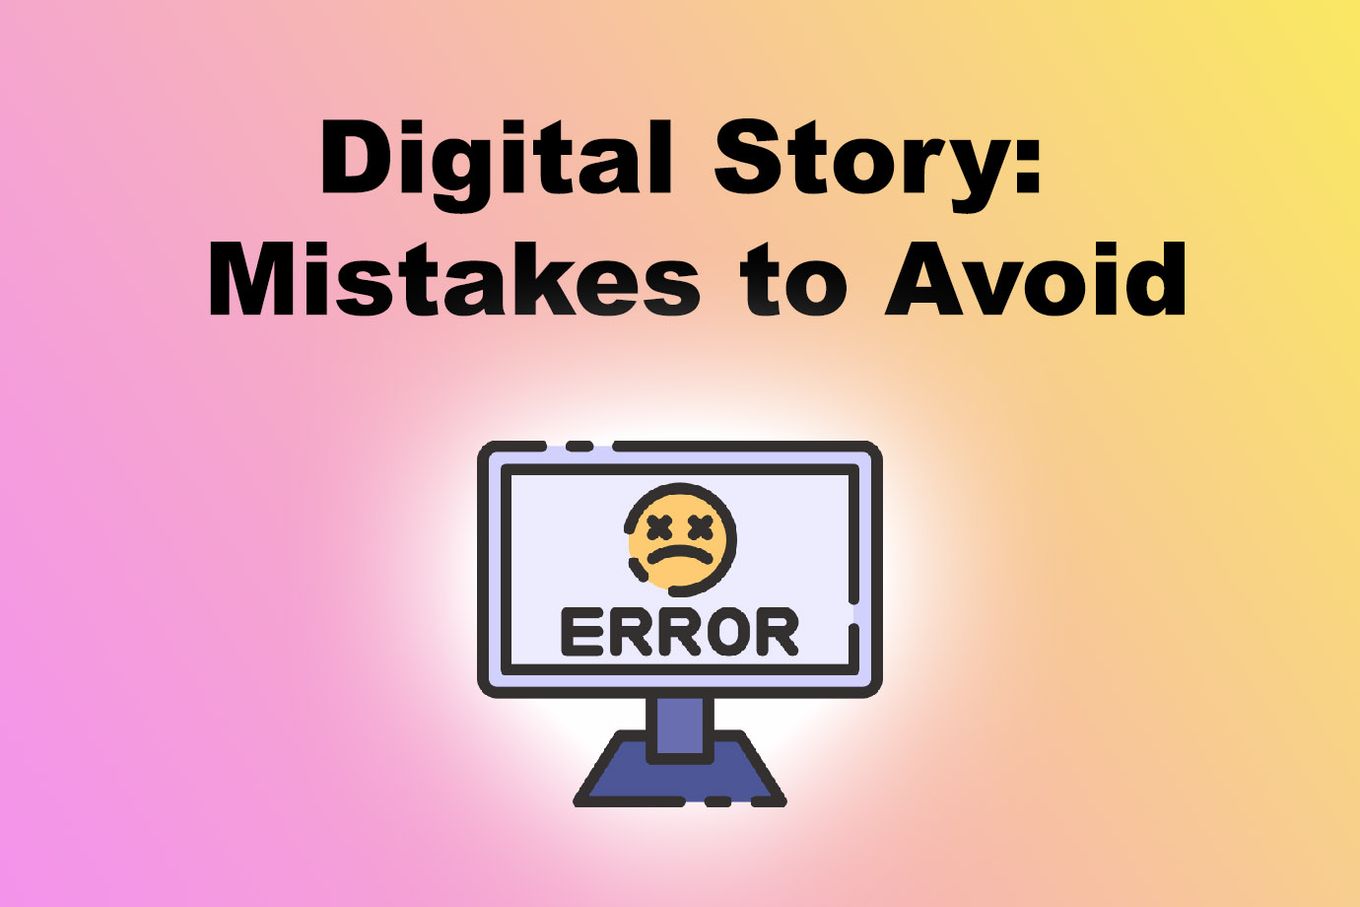 Digital Story - Mistakes to Avoid